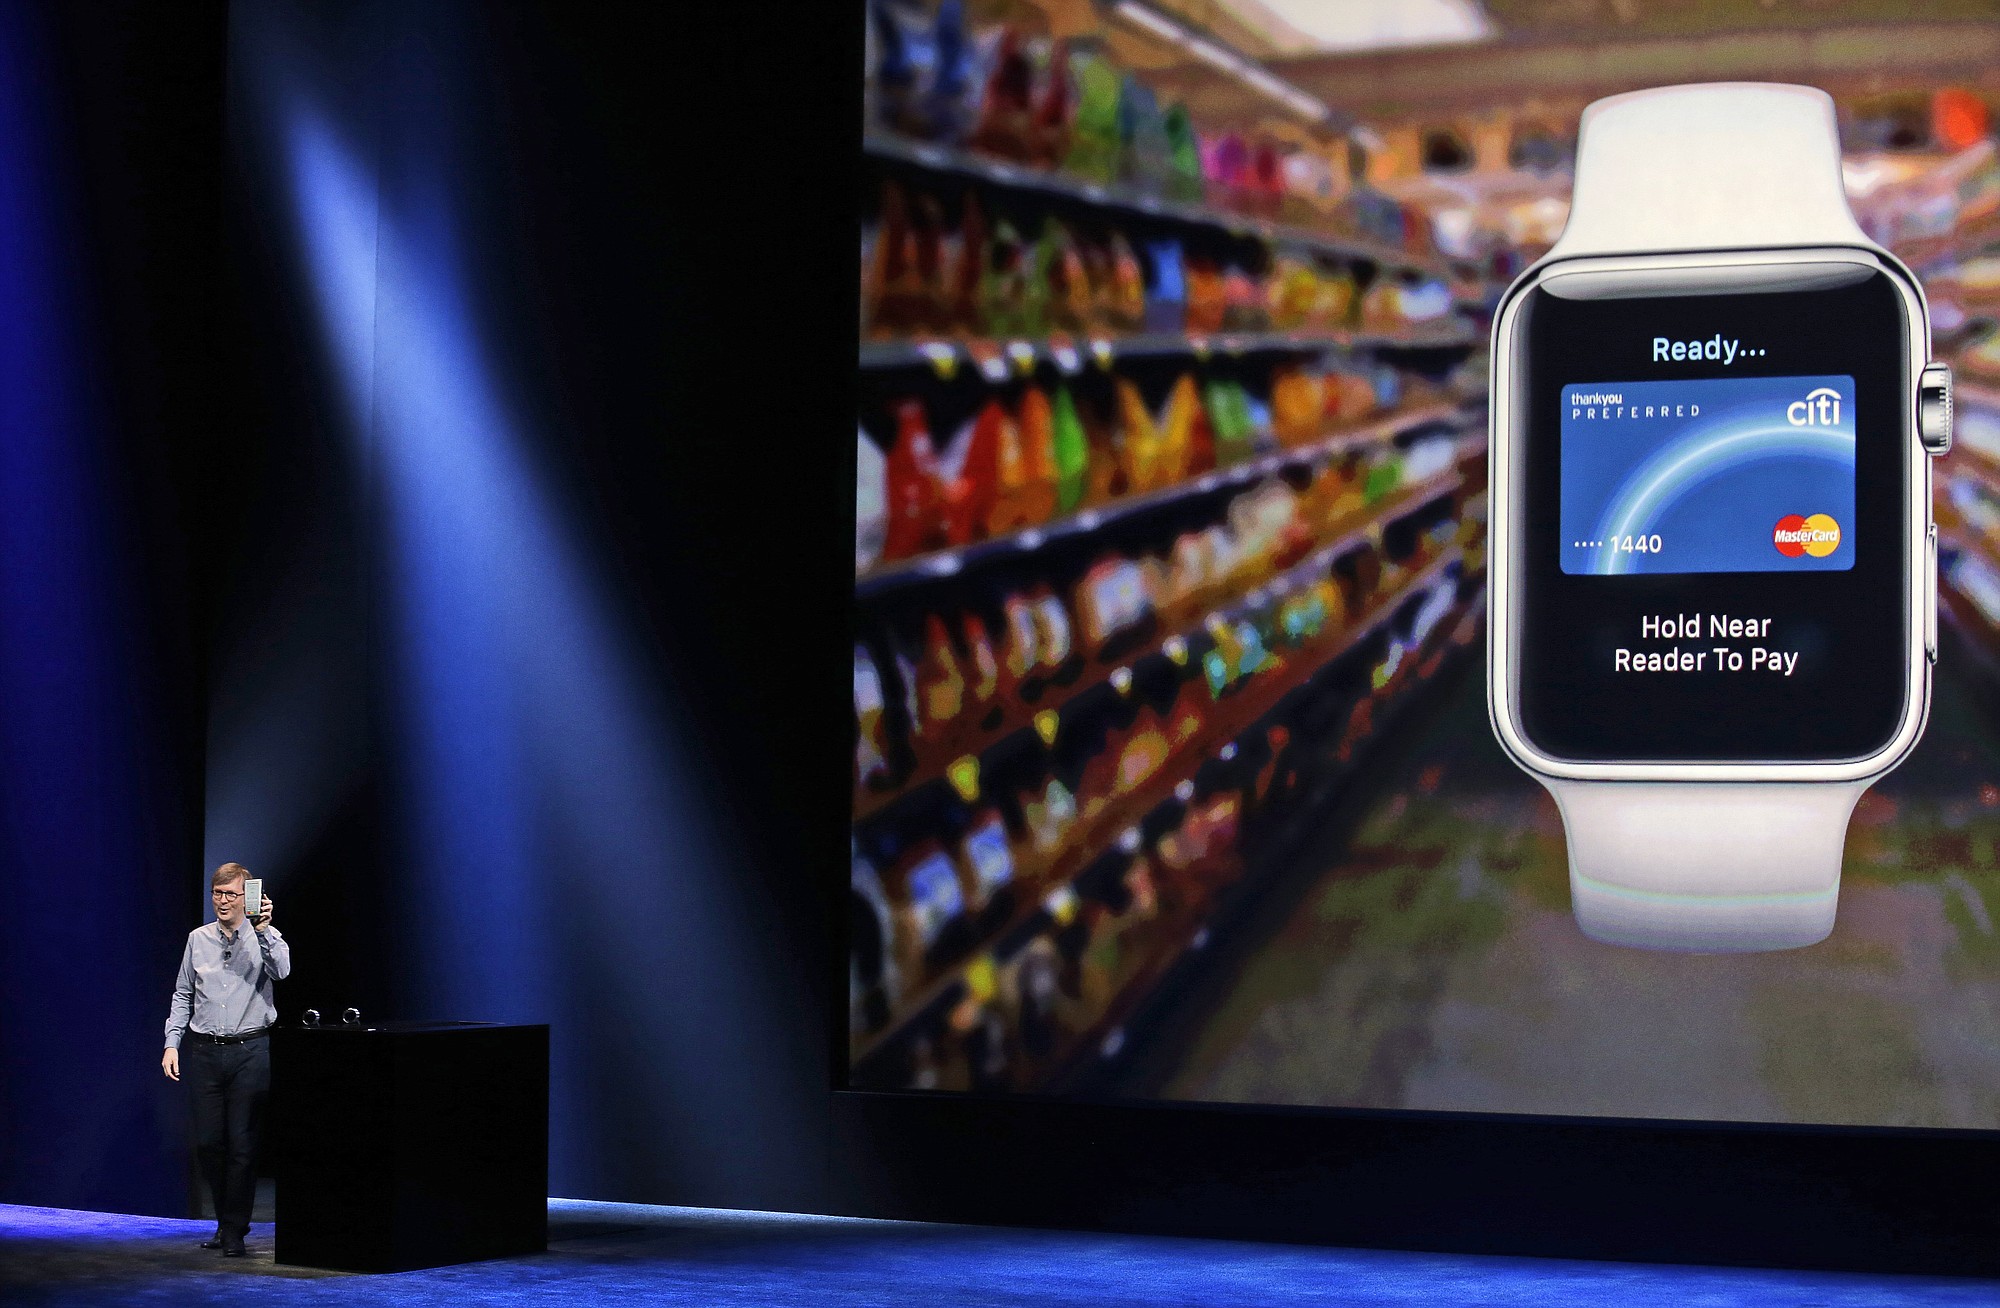 Apple's Kevin Lynch discusses the Apple Pay feature of the new Apple Watch on Monday in San Francisco, Calif.